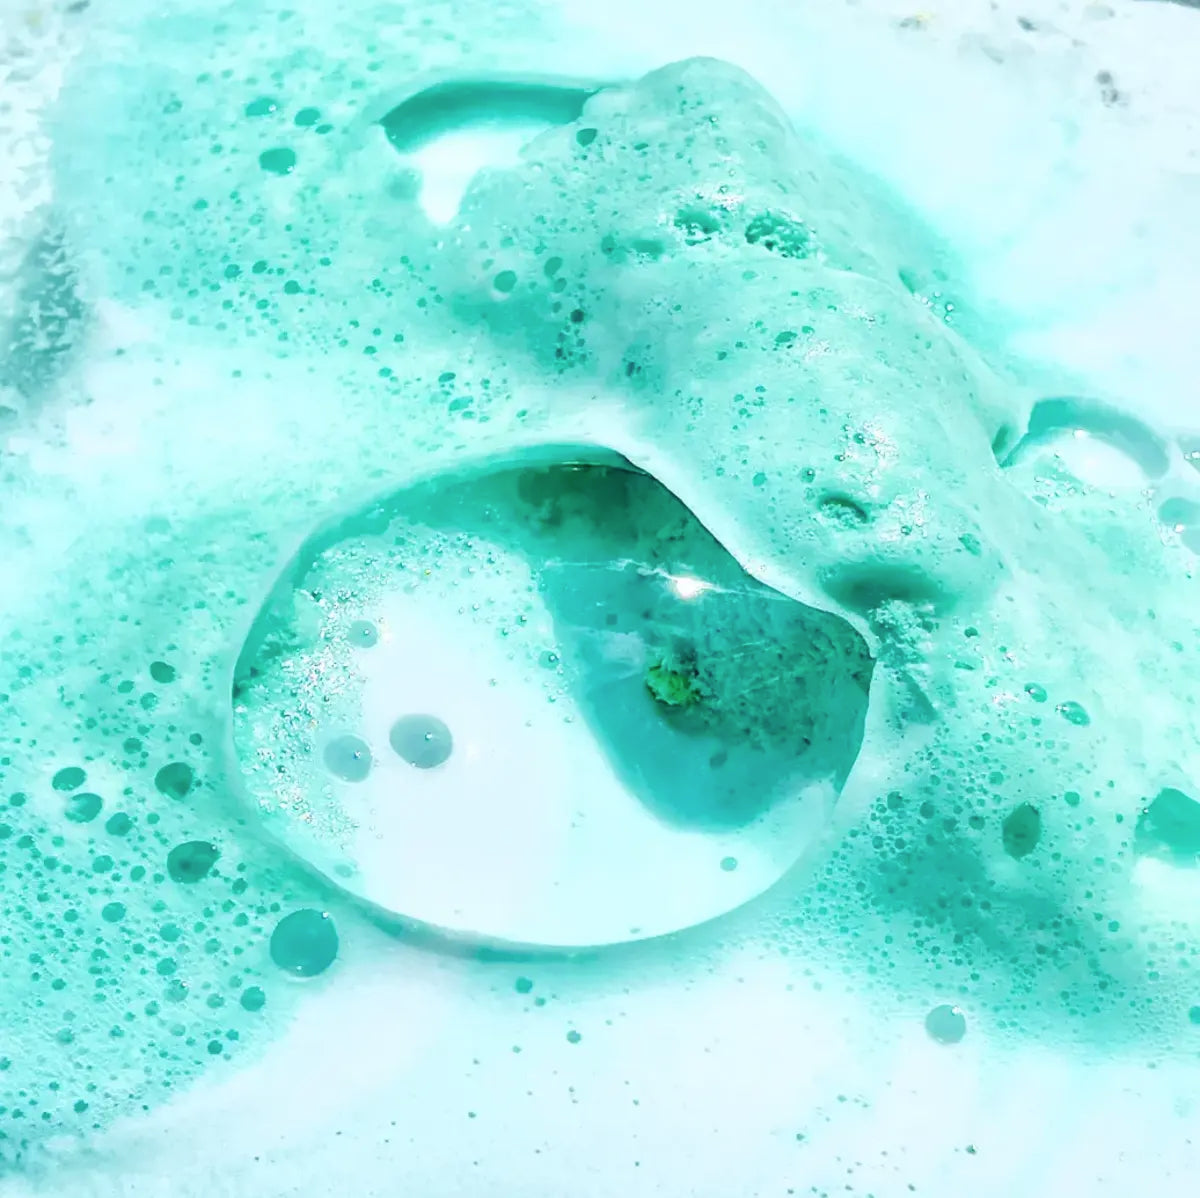 A close up of a Crystal Bath Bomb - Aquamarine - Lemongrass from Summer Salt Body, with bubbles in it, enhanced by the soothing effects of aromatherapy and essential oils.